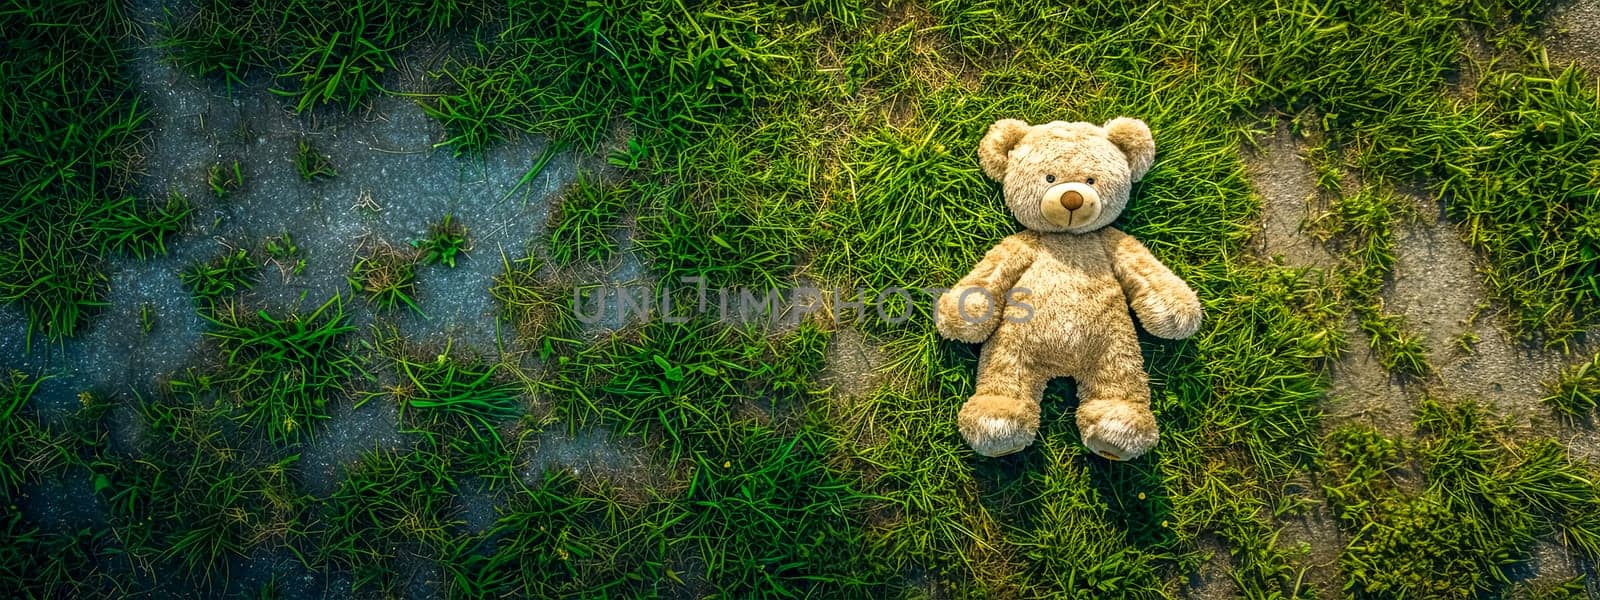 Aerial view of a teddy bear on a grassy path, creating a soft, heartwarming scene. copy space